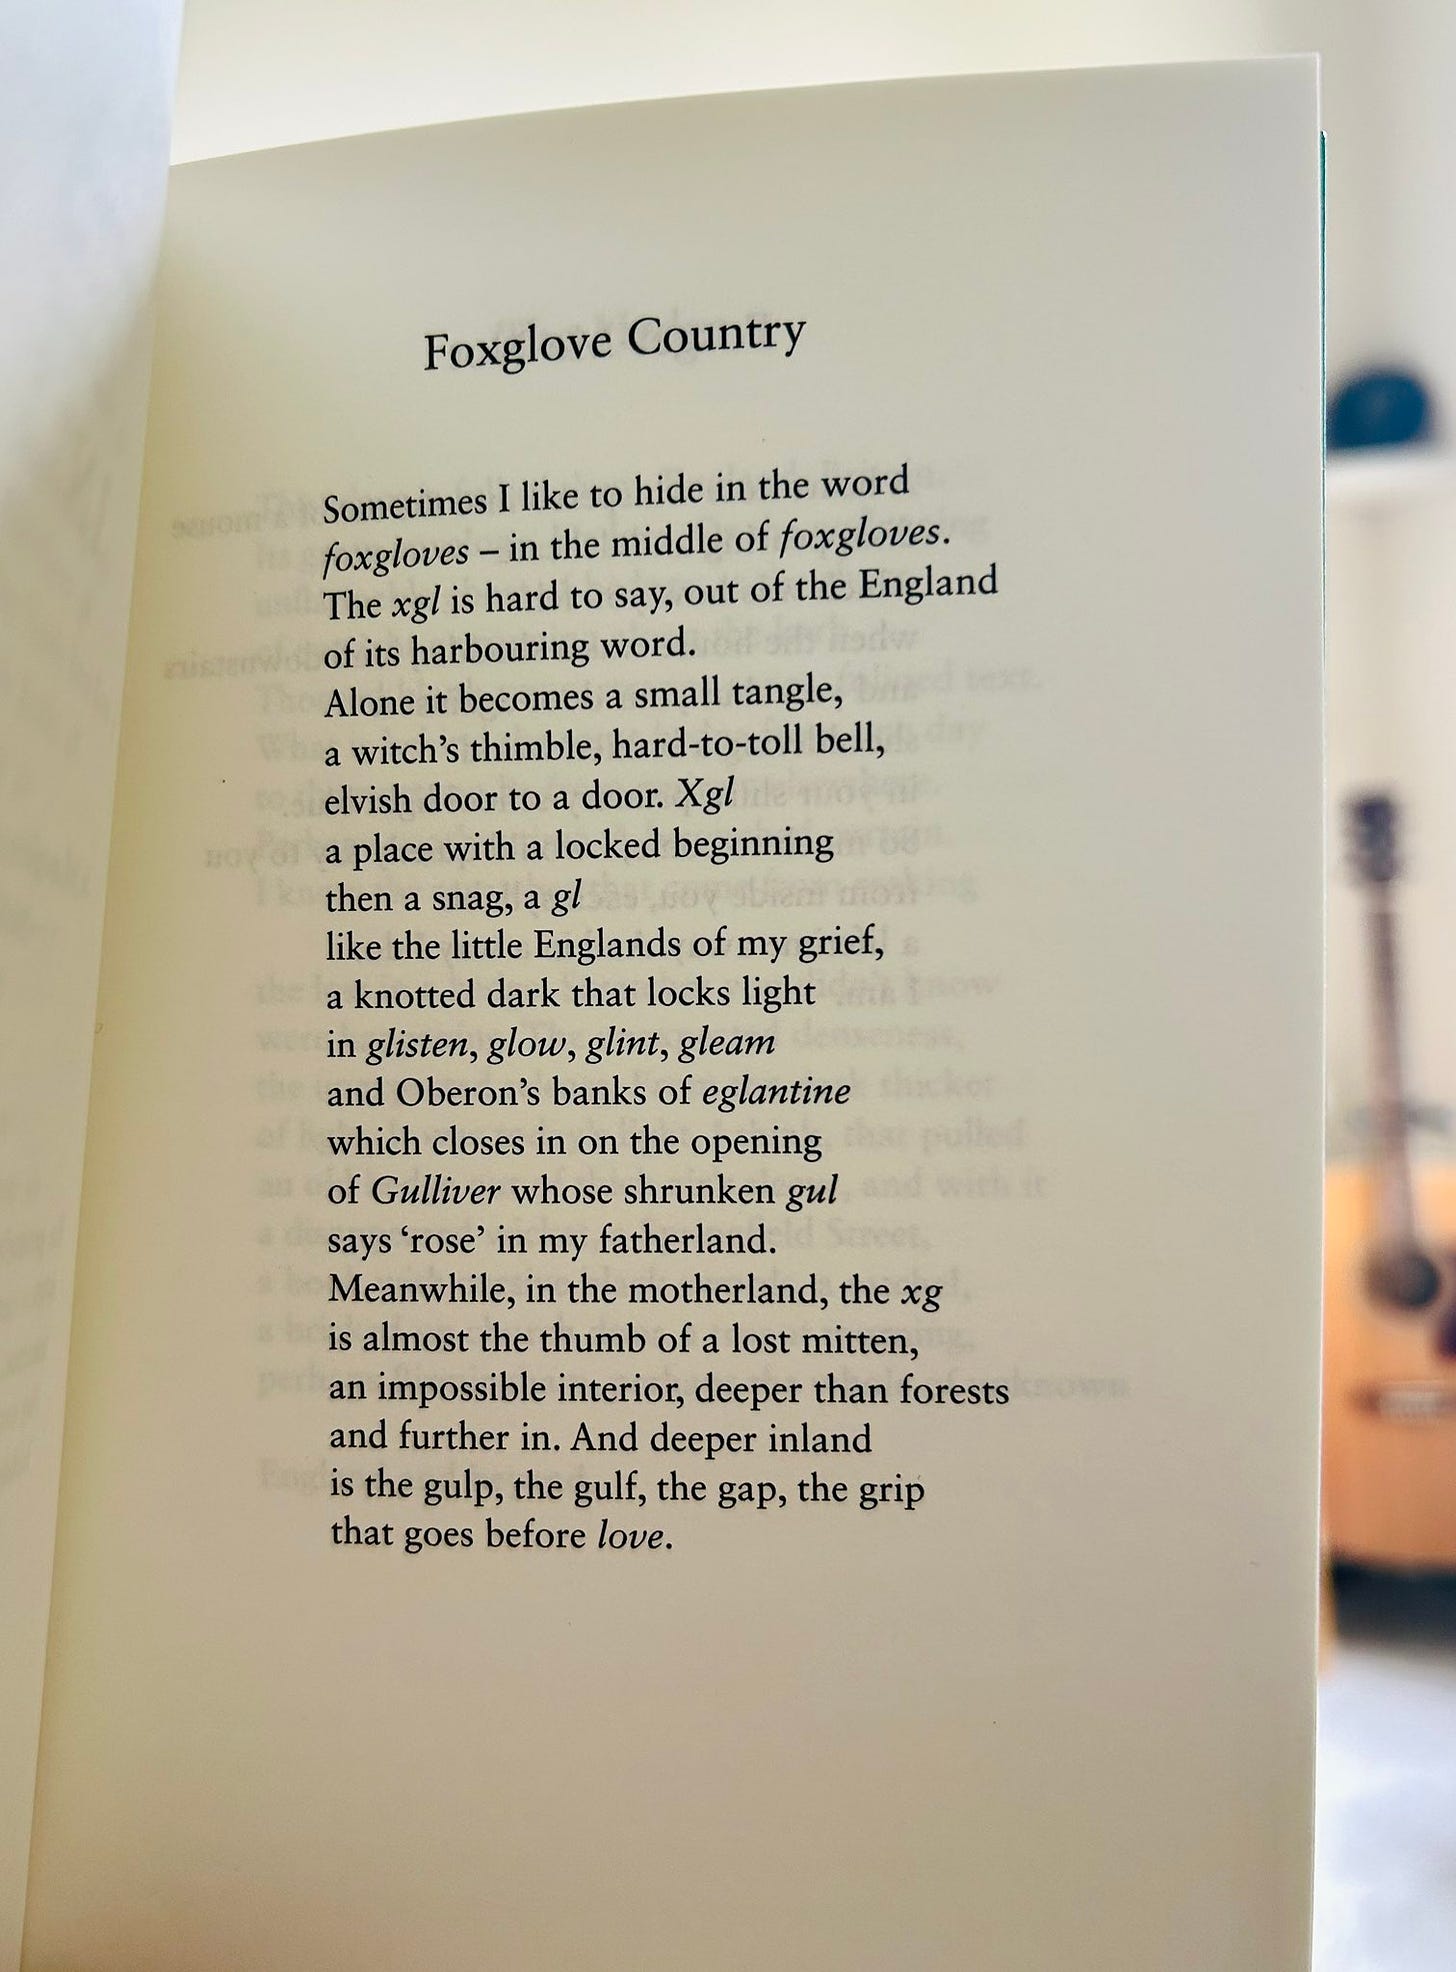 A page from England’s Green is held open. Out of focus in the background is a room with some objects like artwork and a guitar.